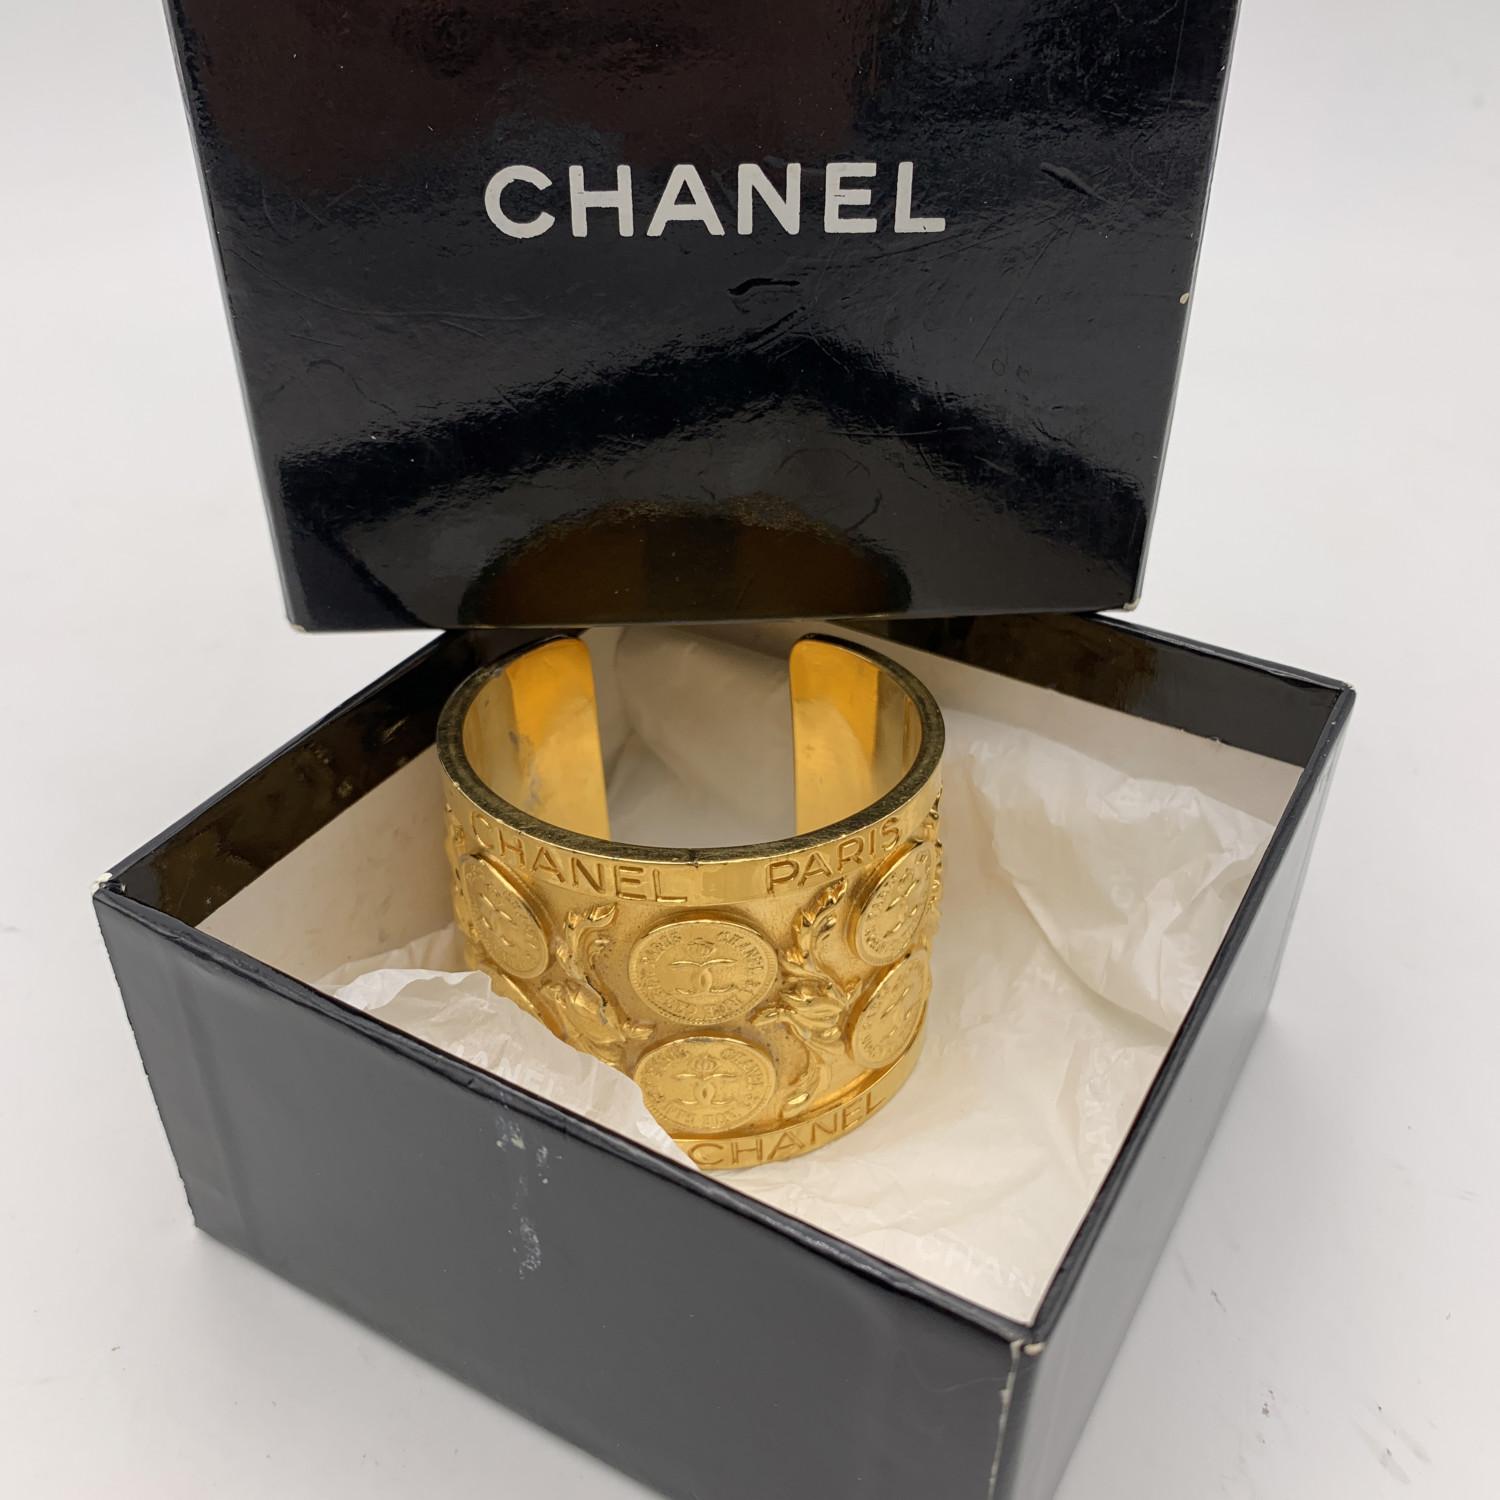 Beautiful rare vintage cuff bracelet by CHANEL. Gold metal bracelet with CC coin decorations and 'Chanel Paris' and 'Coco Chanel' writings. 'Chanel' basic signature engraved internally (according to the internal hallmark, the bracelet should date